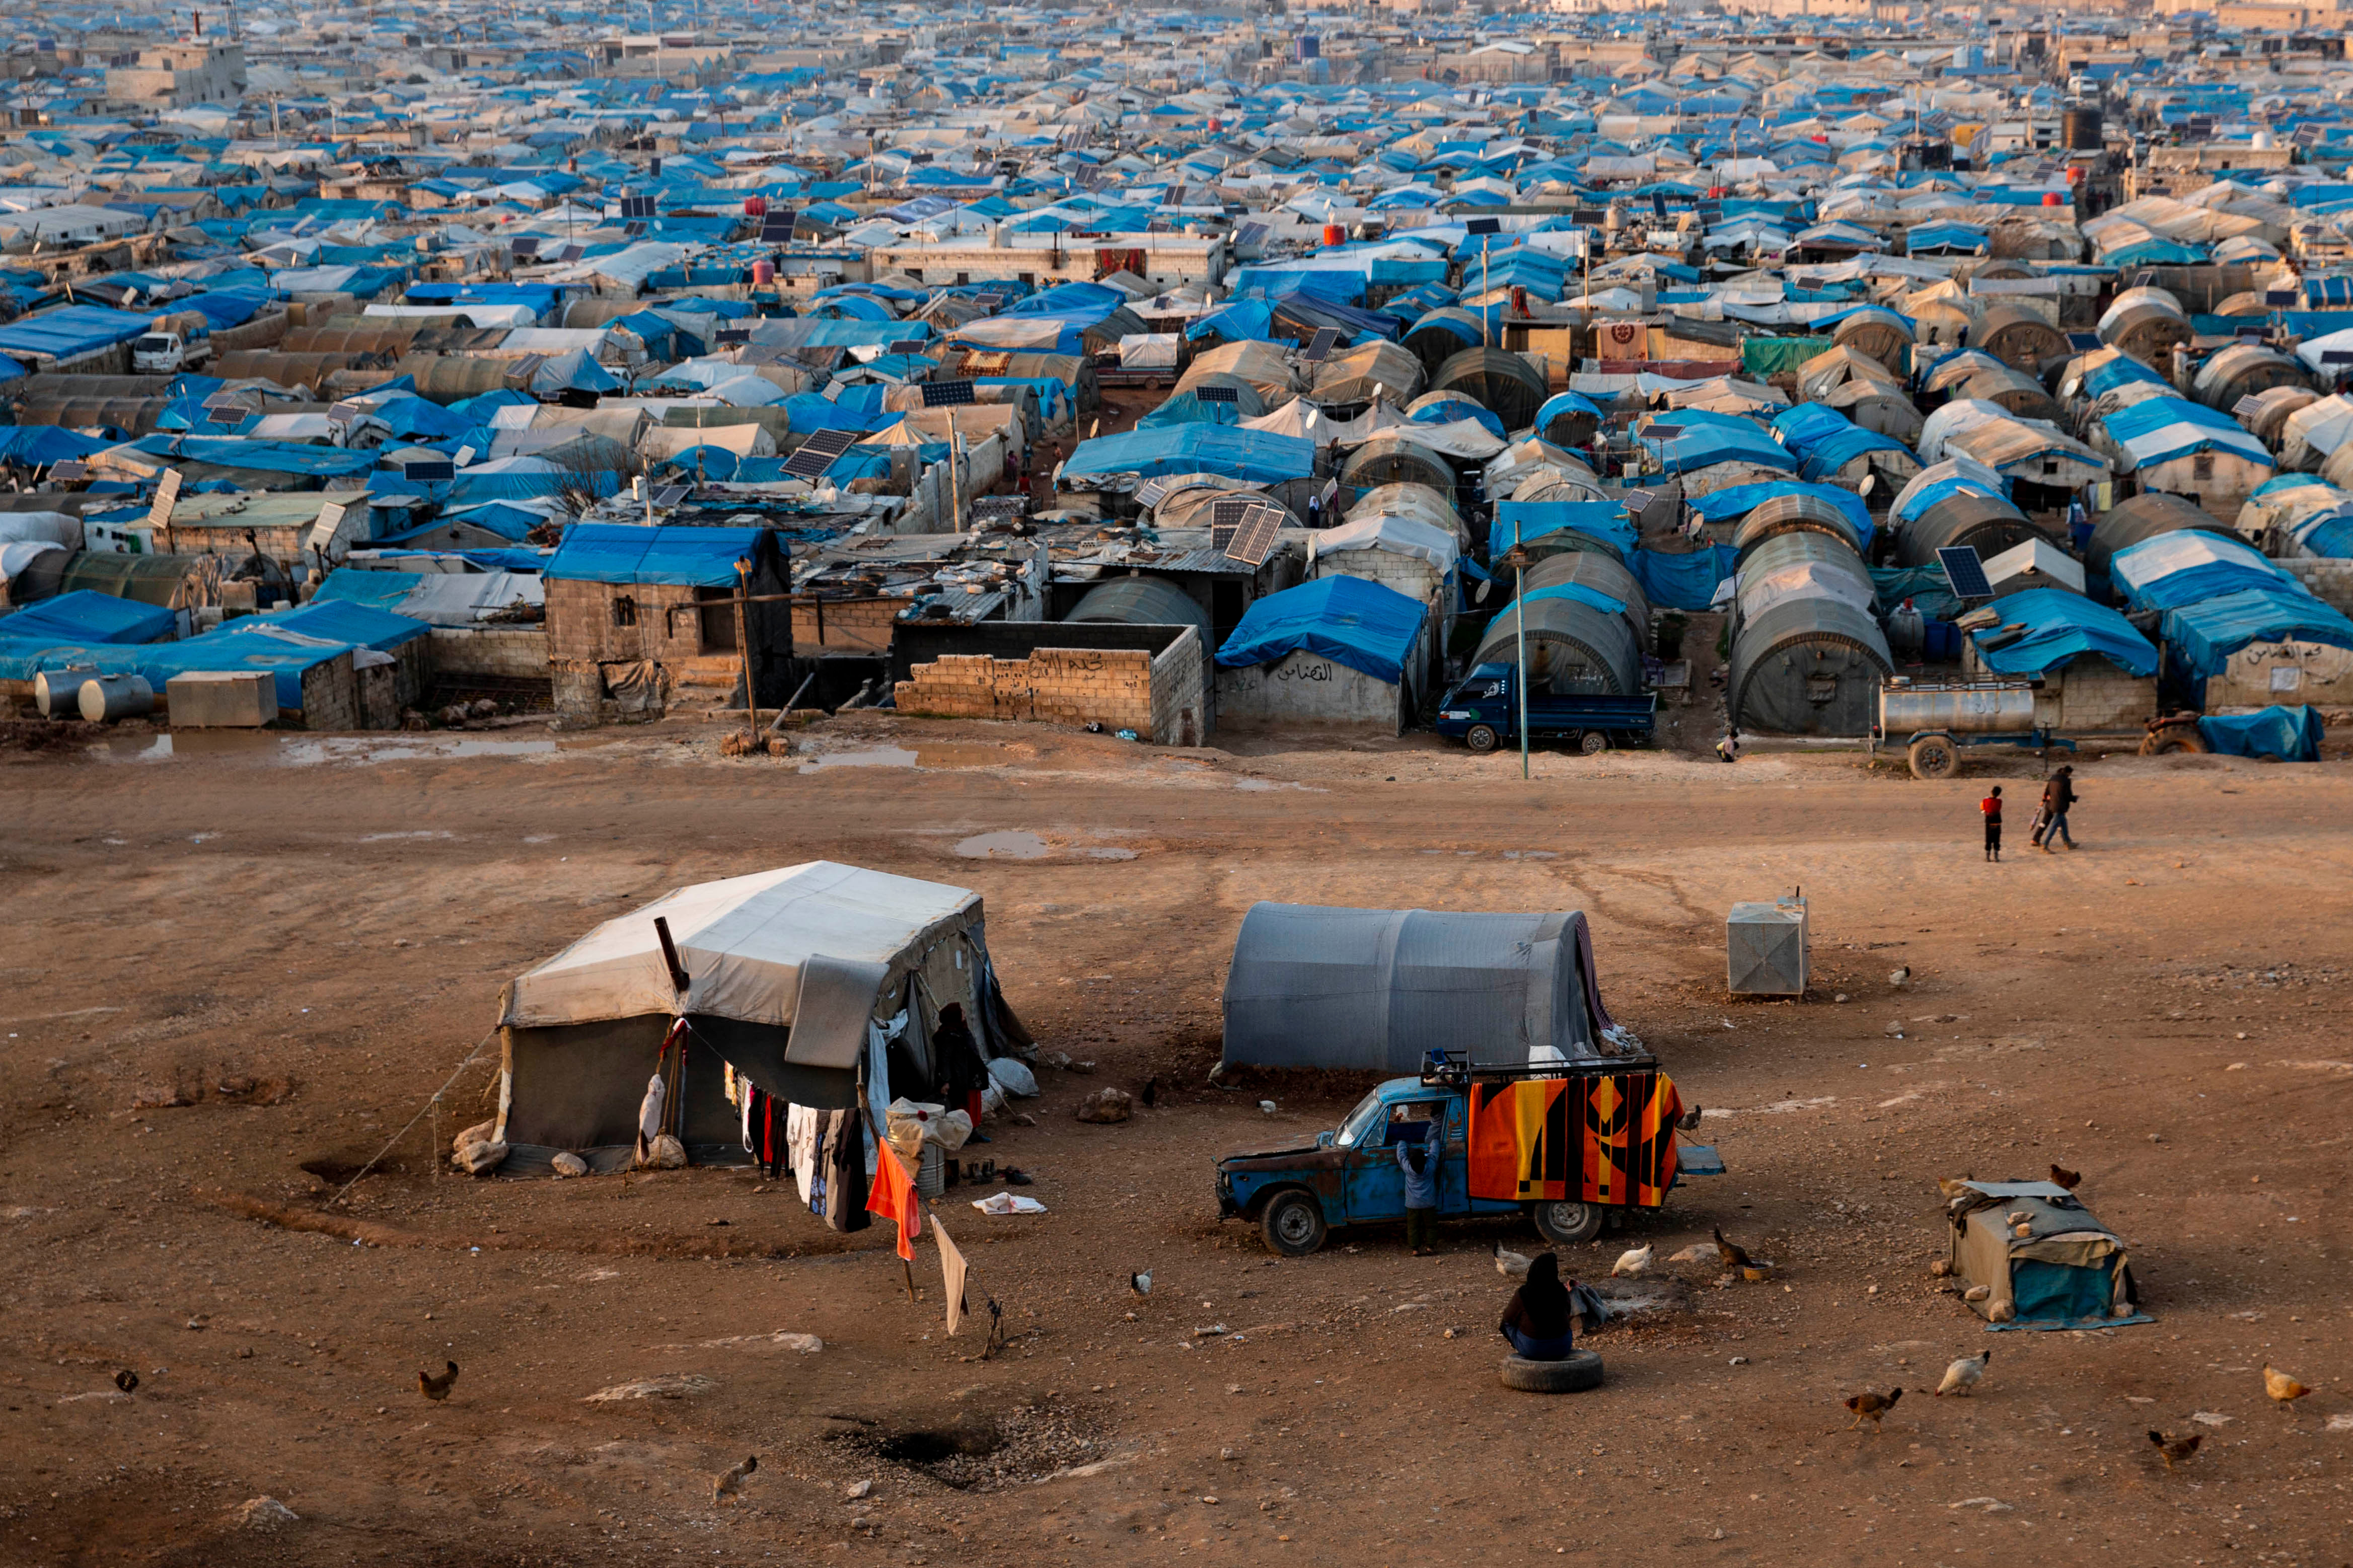 Build cities, not camps: A proposal for addressing refugee crises | Brookings